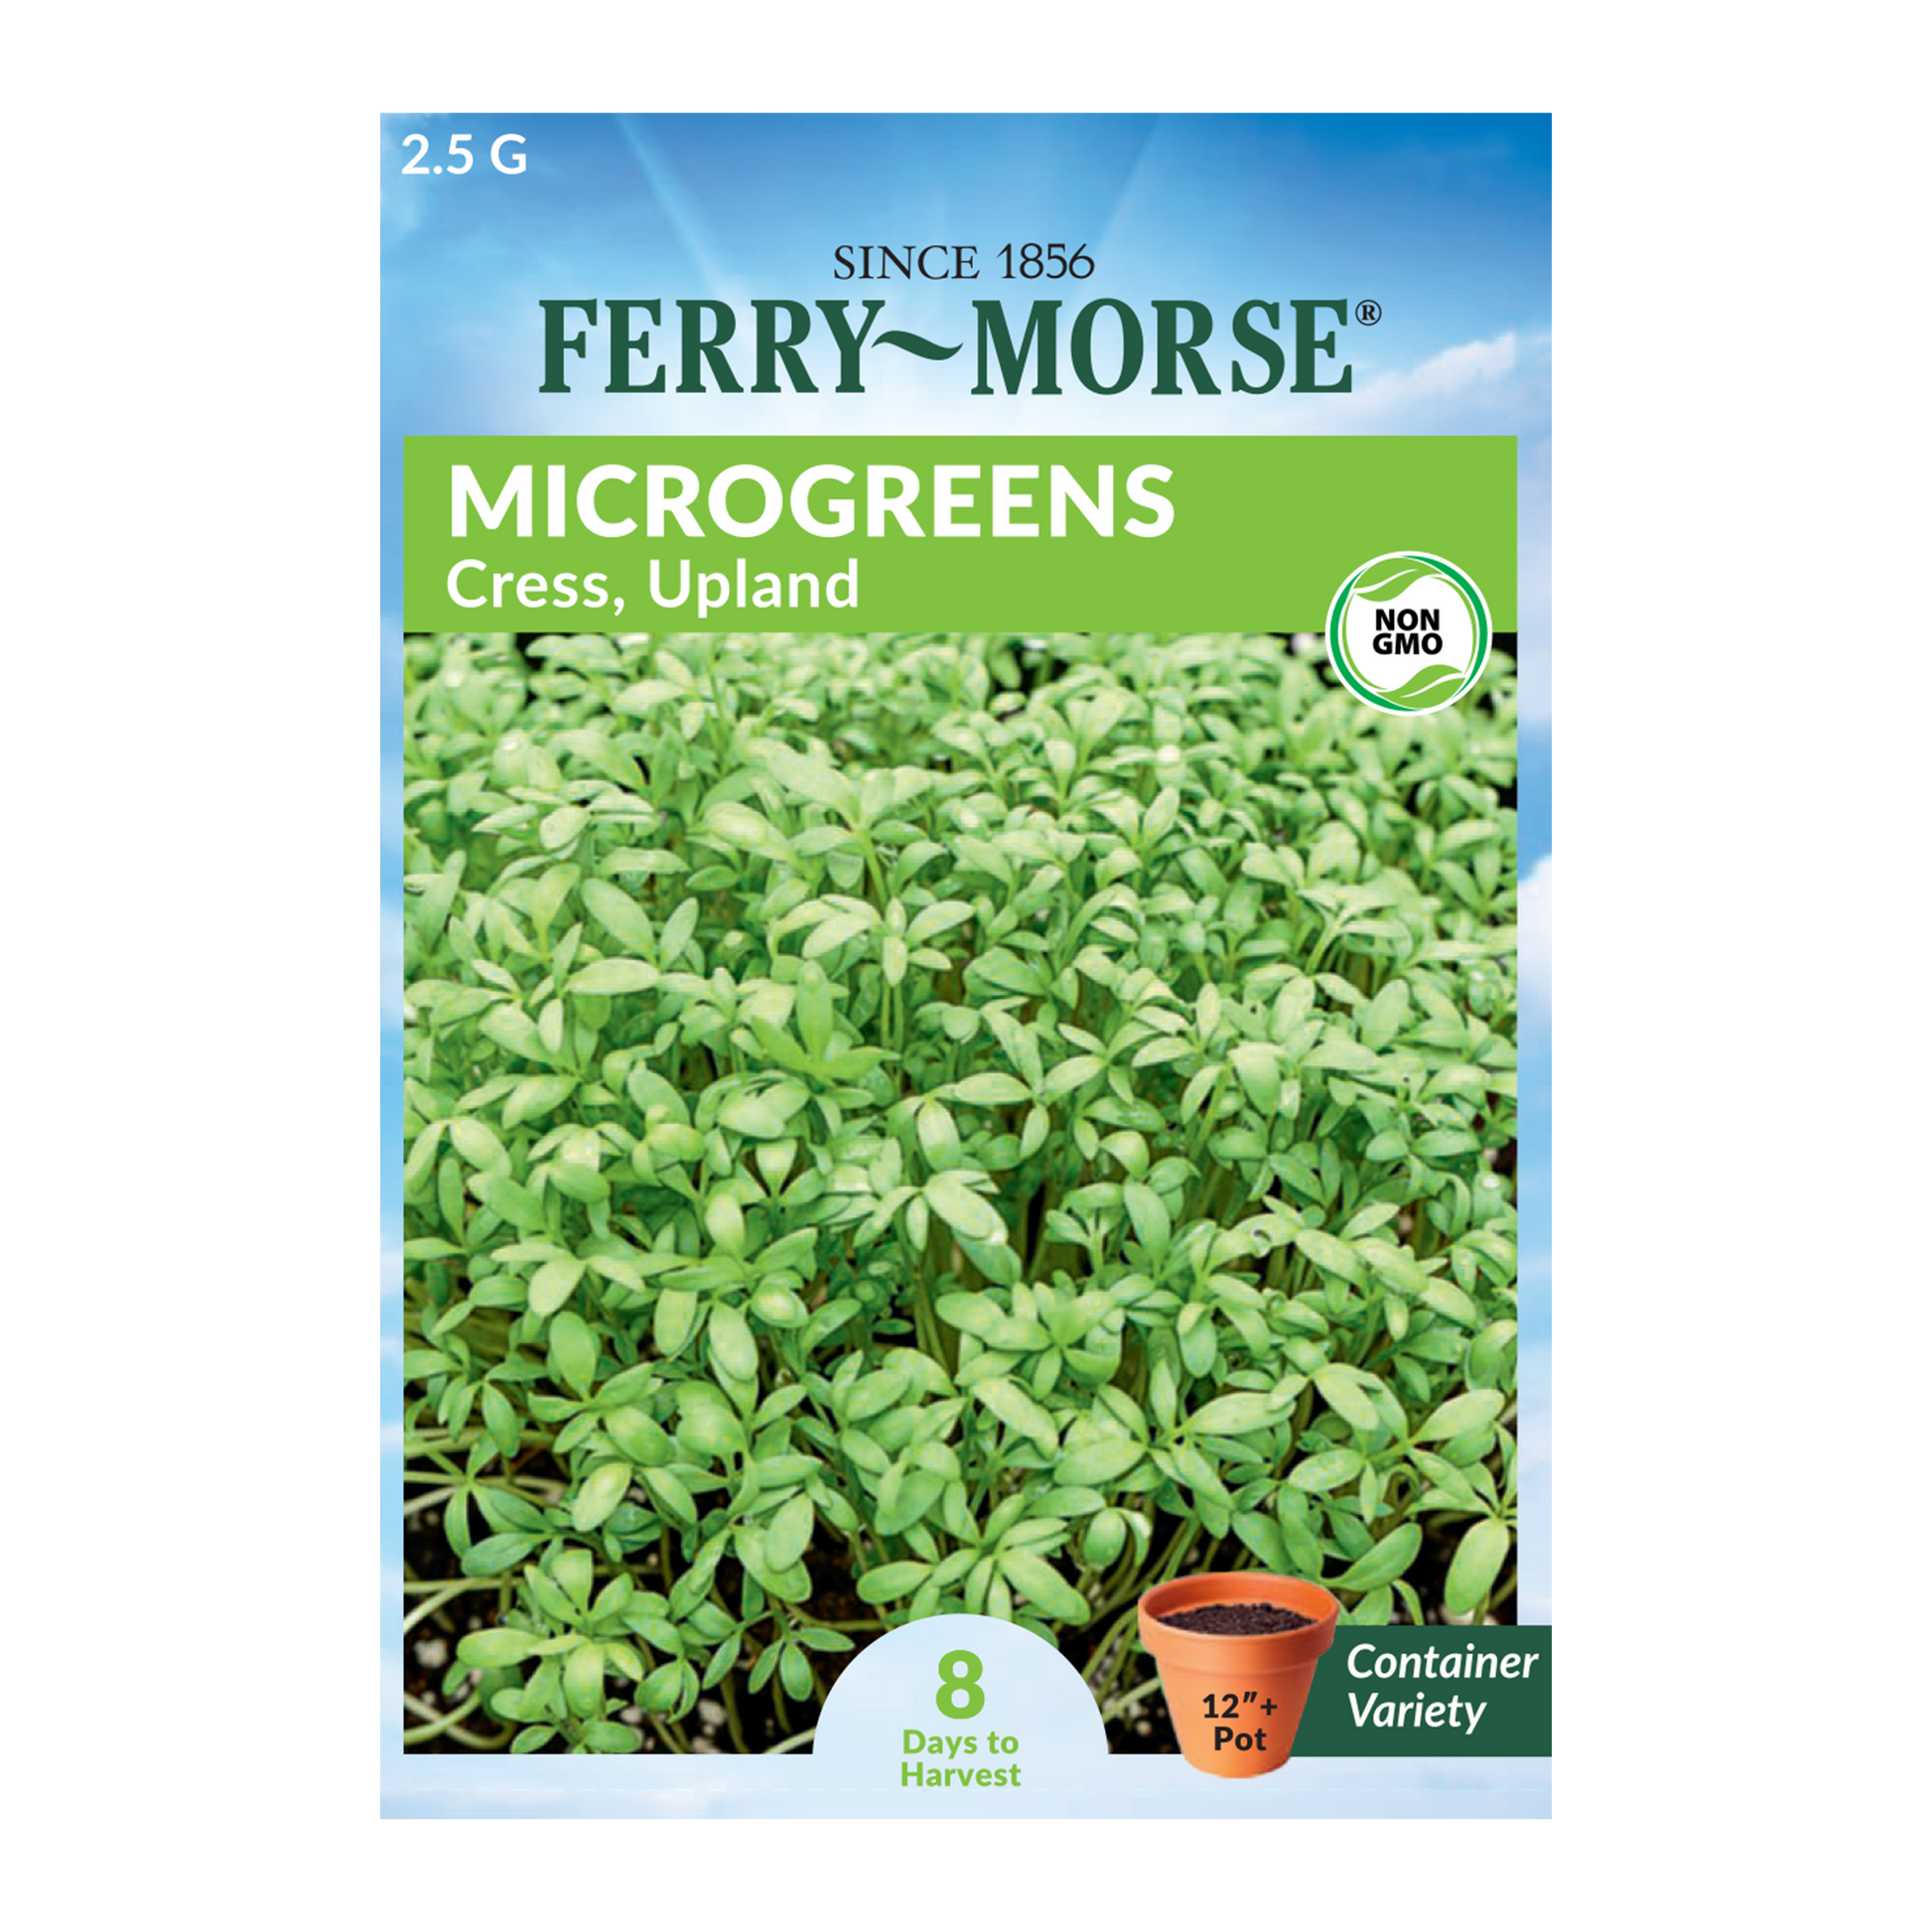 Upland Cress Microgreens Seeds packet front from Ferry Morse_8 Days to Harvest